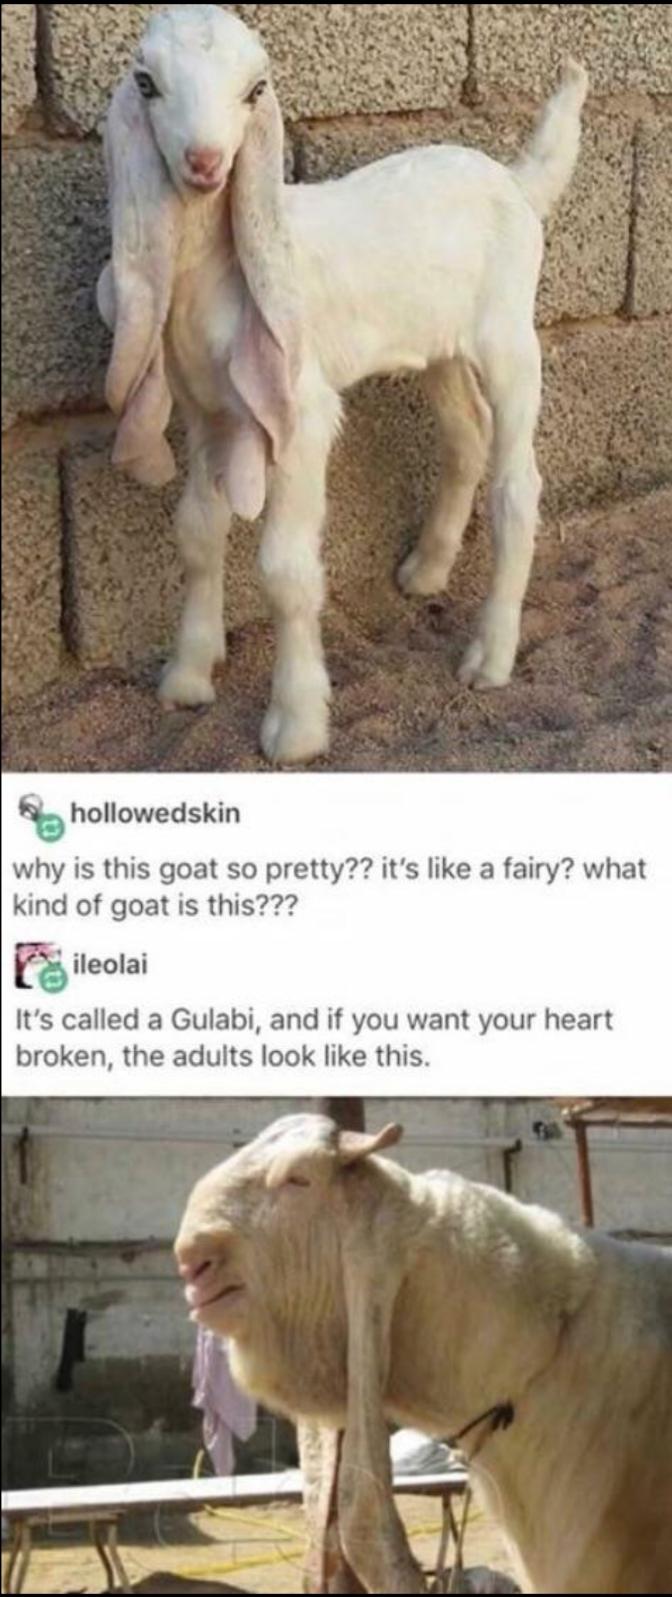 gulabi goat - hollowedskin why is this goat so pretty?? it's a fairy? what kind of goat is this??? F ileolai It's called a Gulabi, and if you want your heart broken, the adults look this.